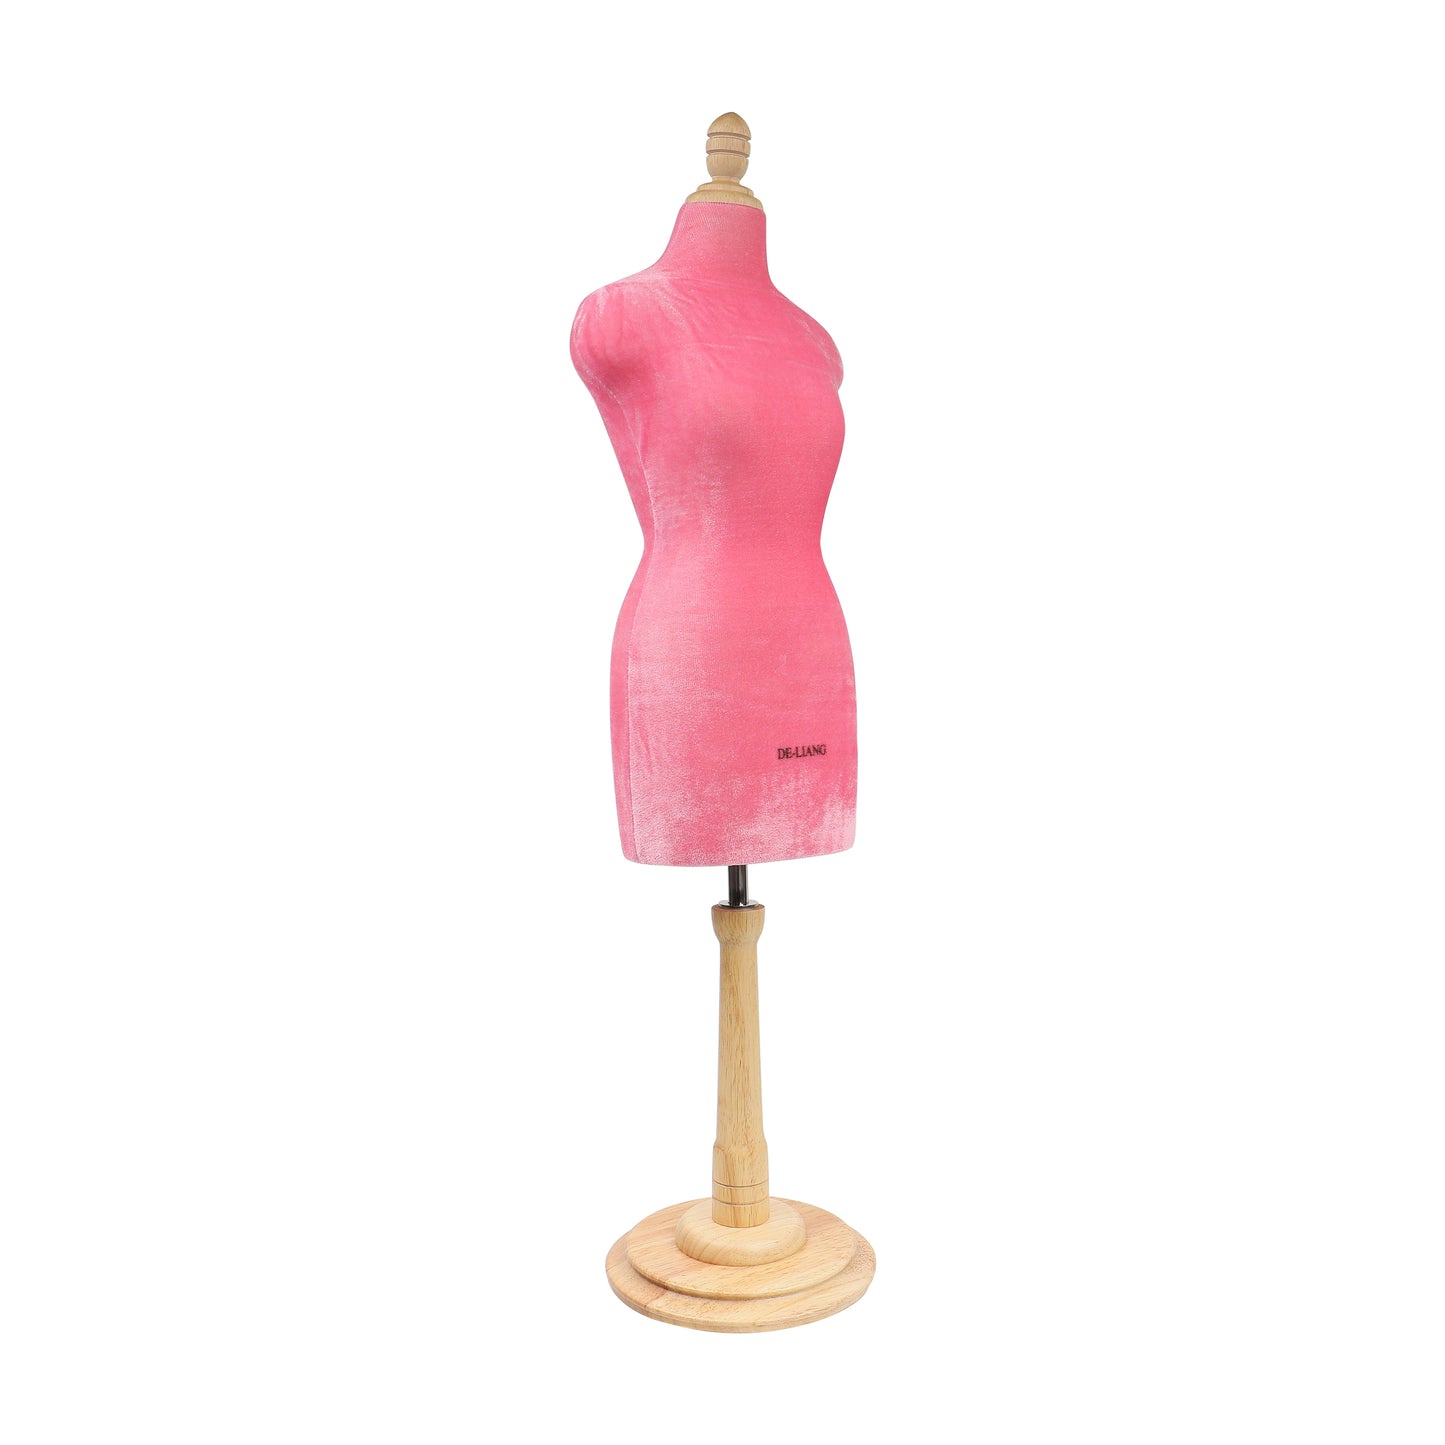 DE-LIANG  Half scale mini dressform,DL803 fully pinnable tailor sewing pink velvet mannequin with wooden round base, not perfect but ok to draping sew